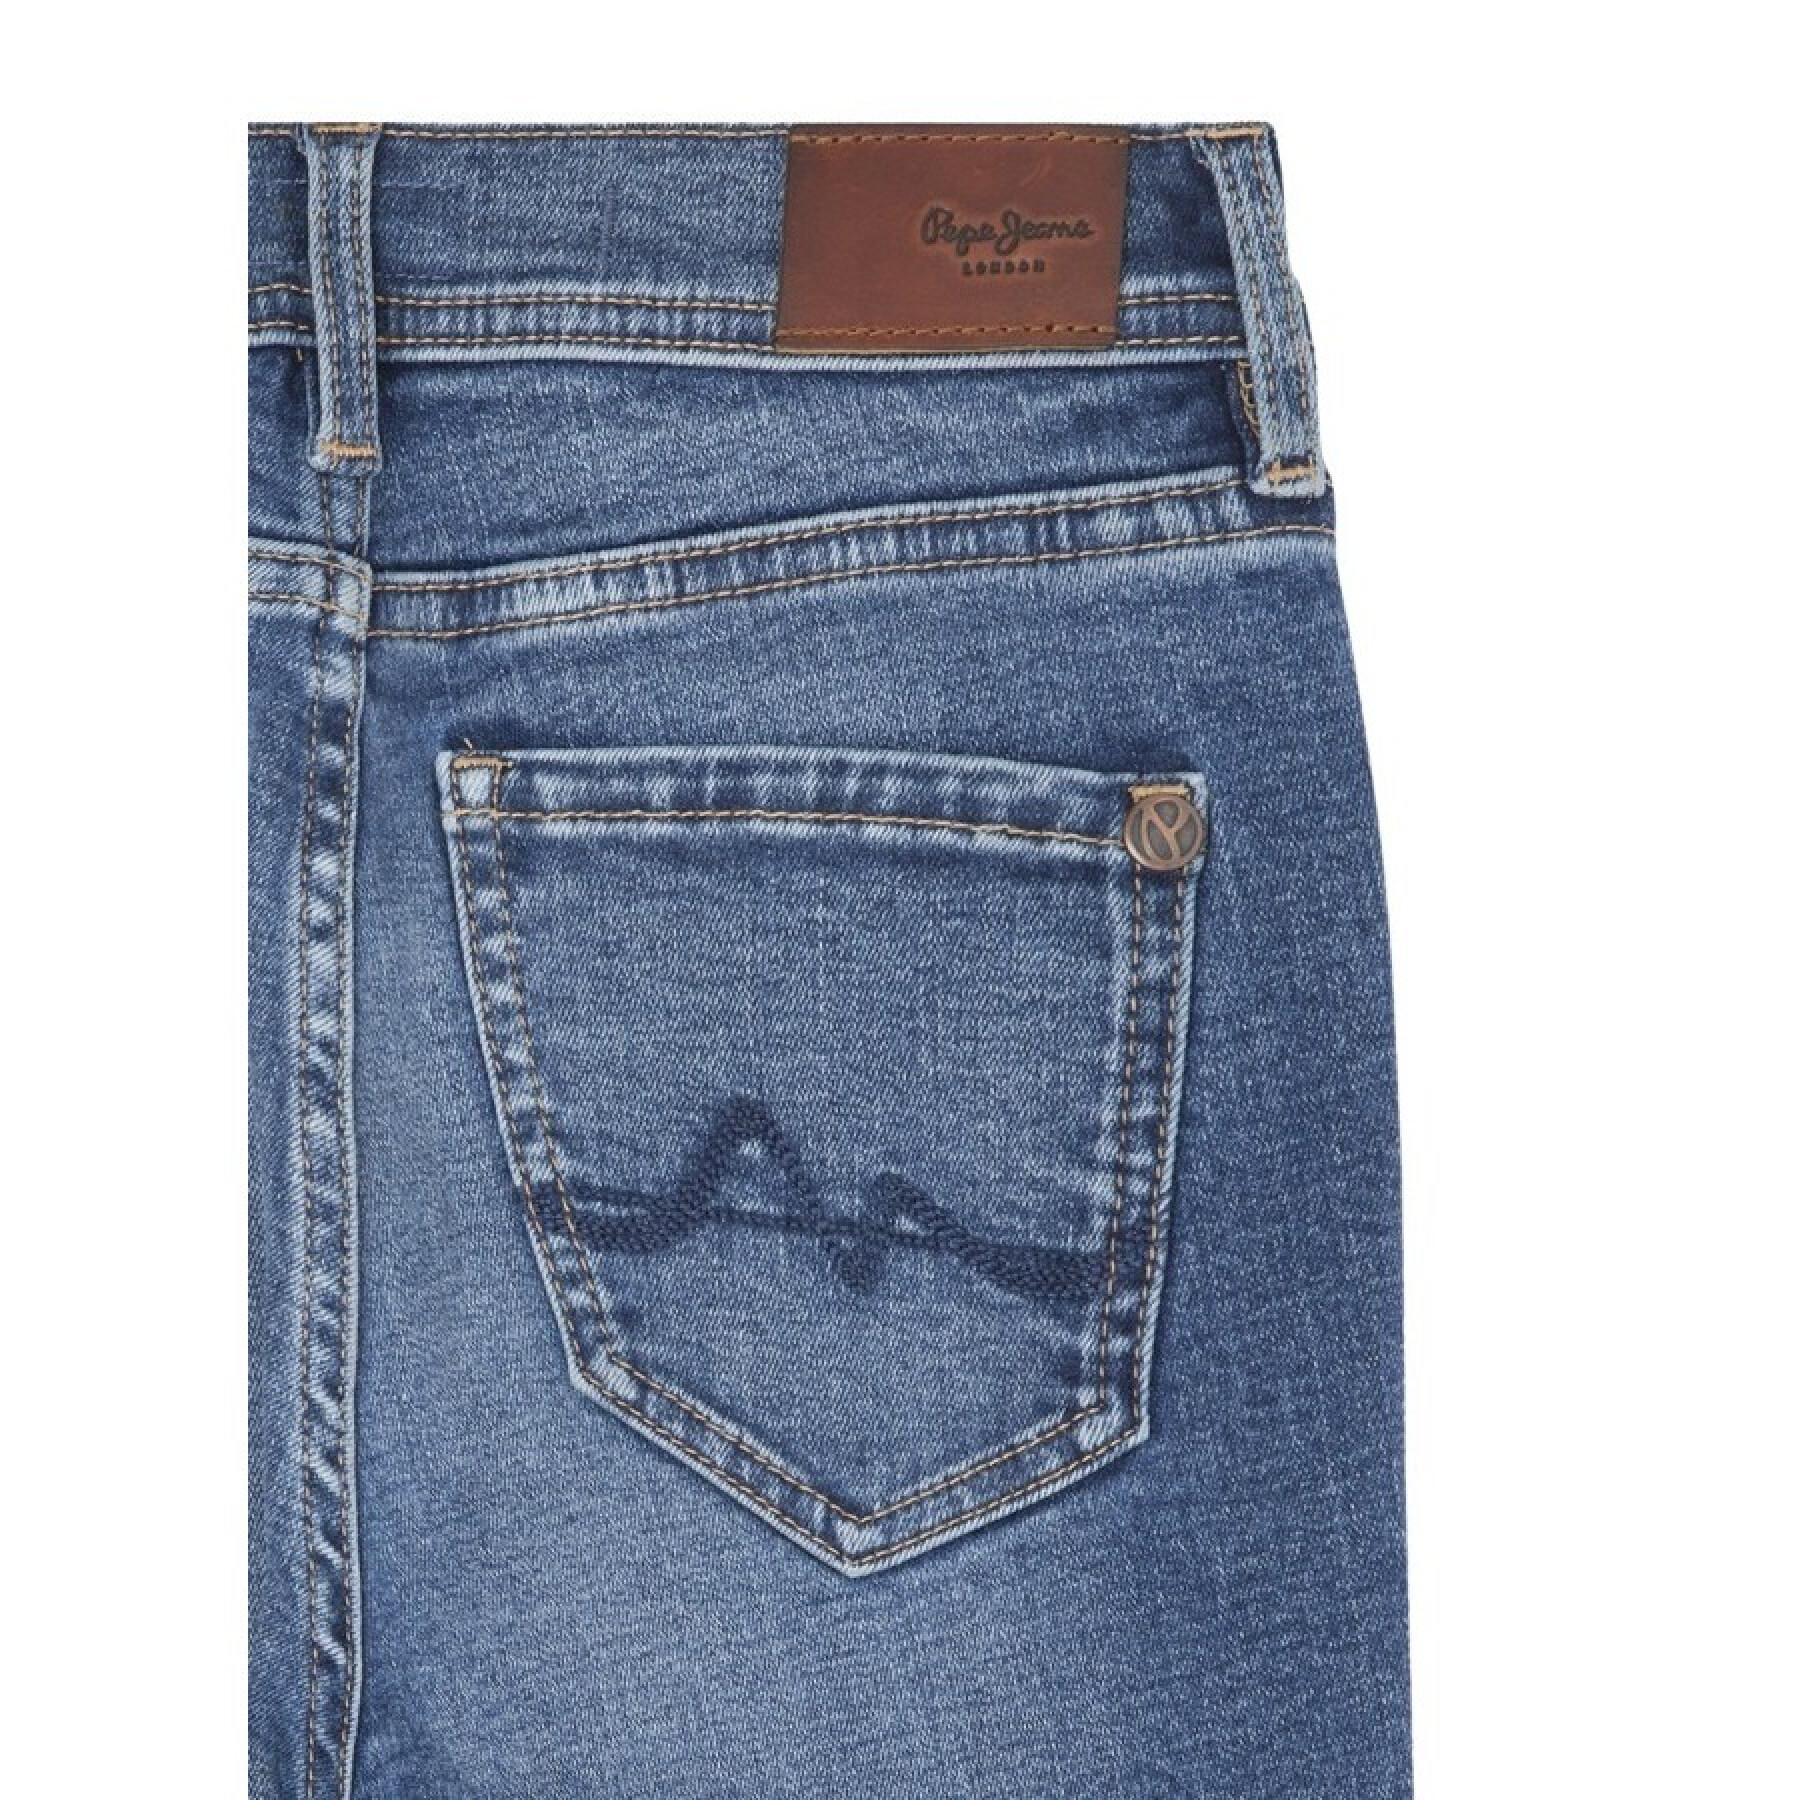 Jegging fille Pepe Jeans Madison